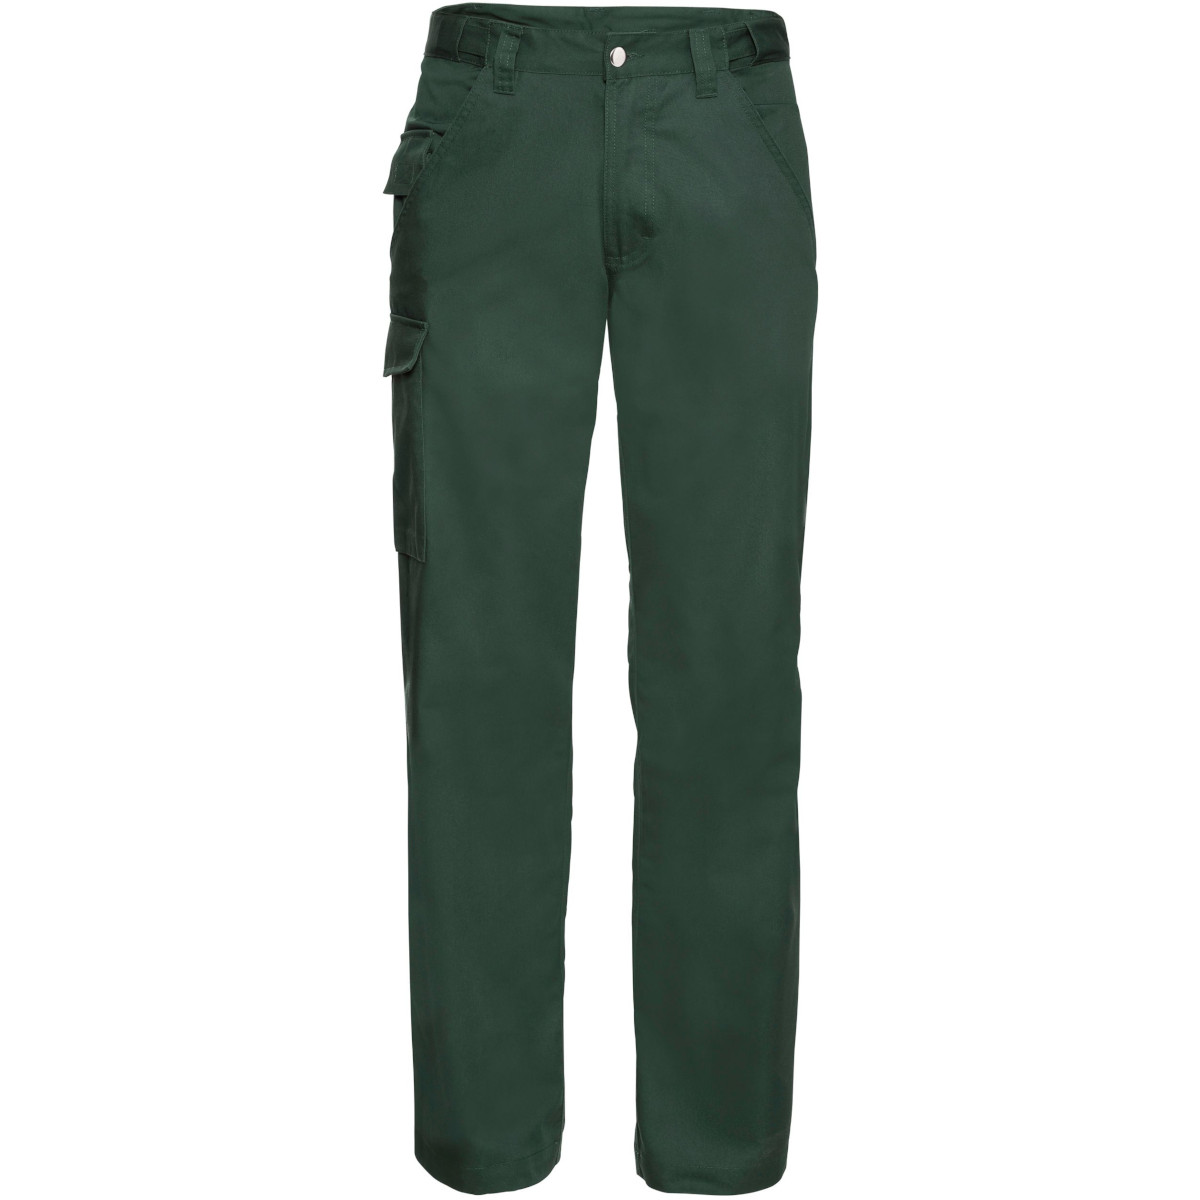 Buy Kansas Icon work trousers at Cheap-workwear.com